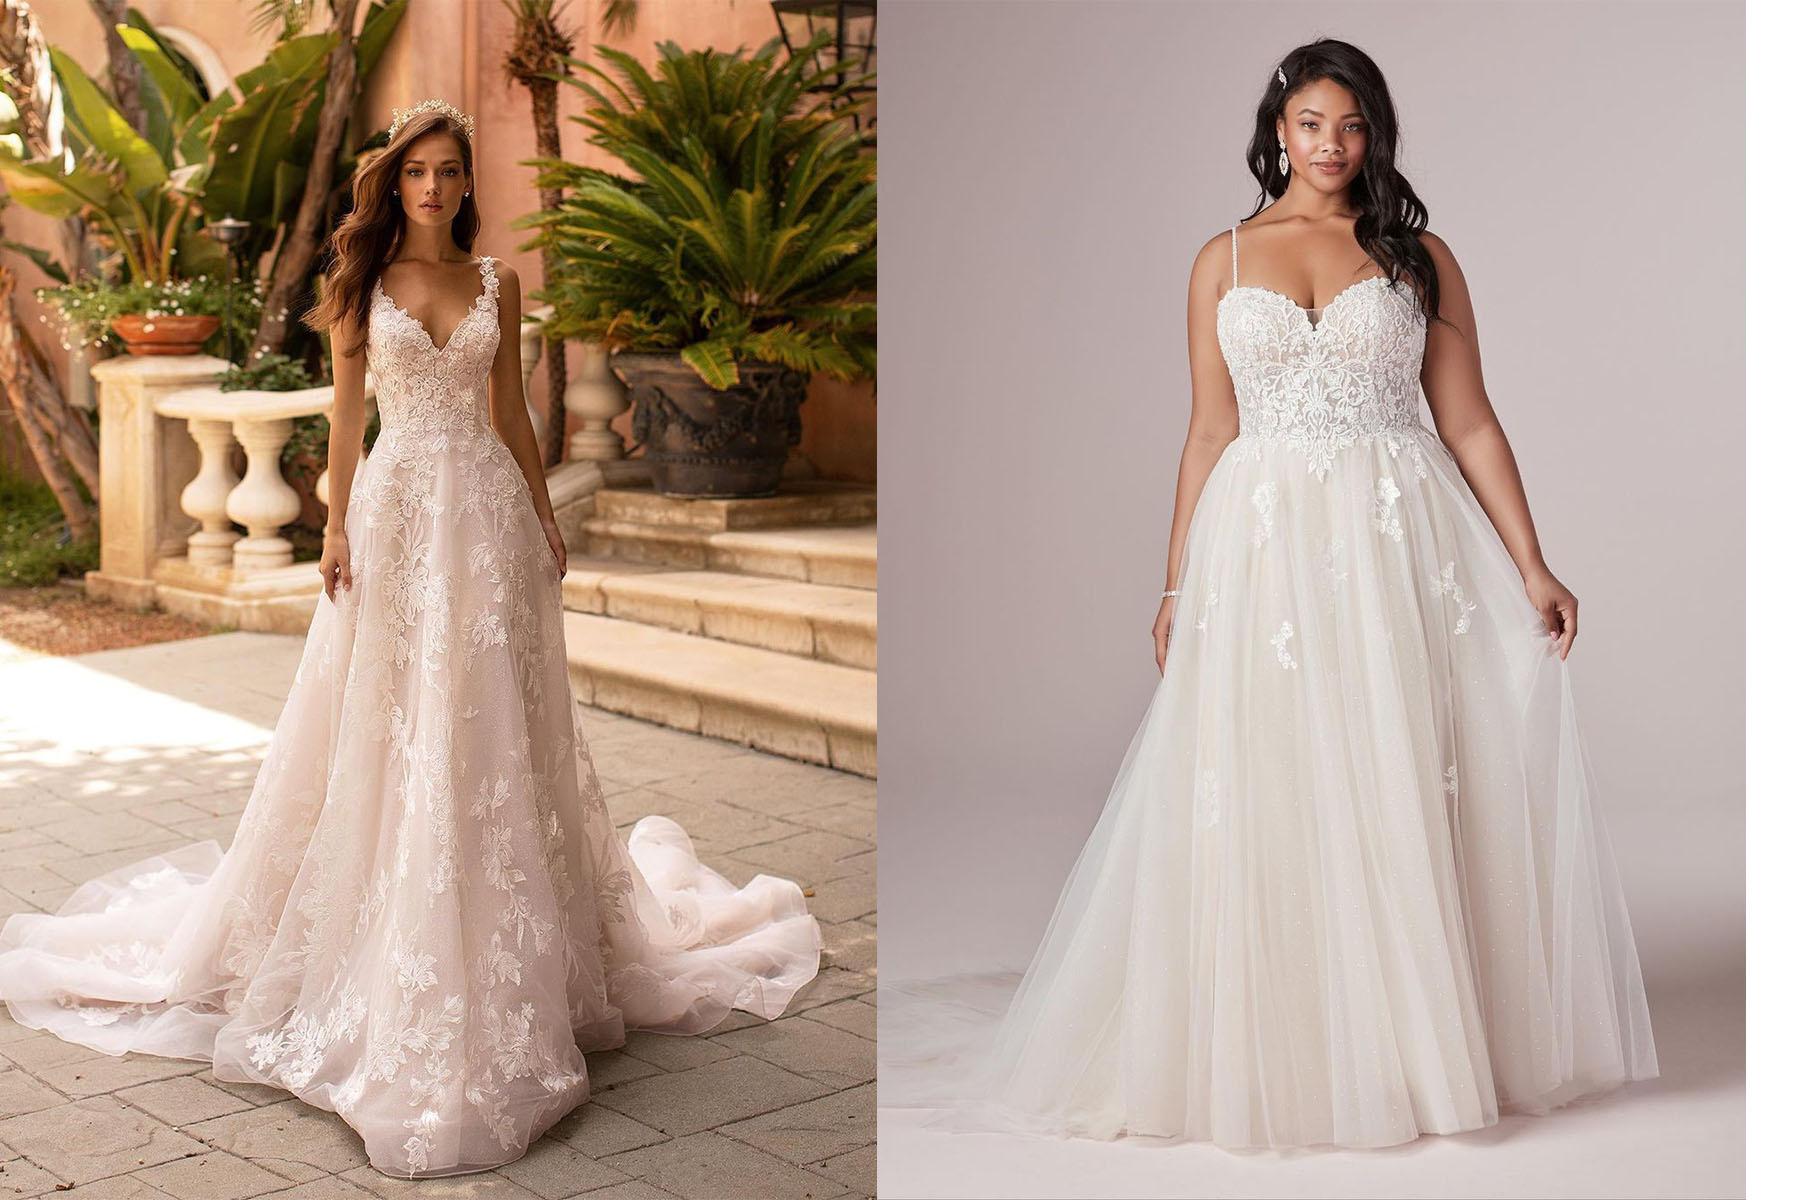 Black Owned Bridal Shop - Wedding Dresses and Gowns London